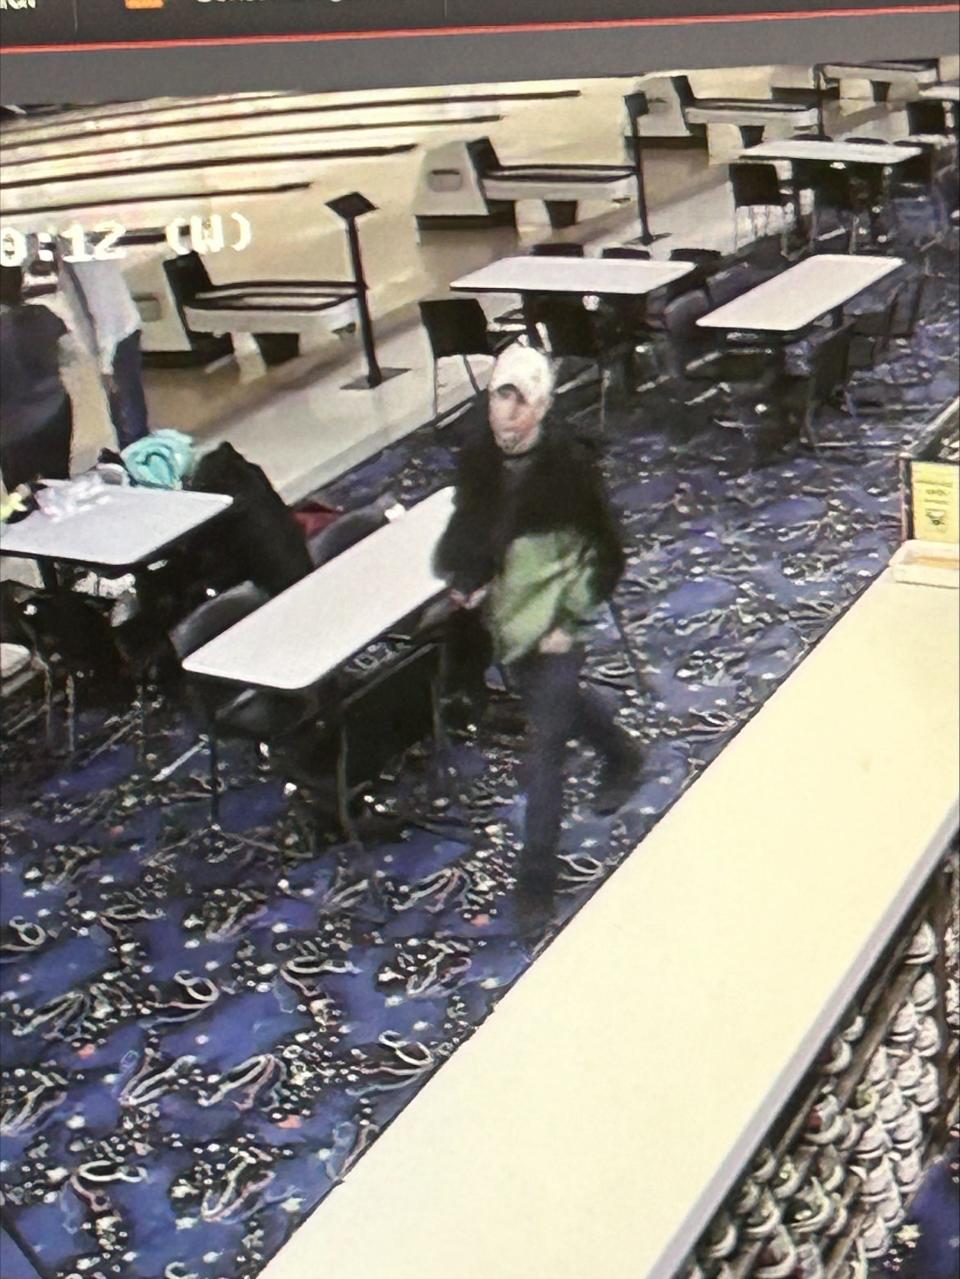 In a screen shot taken from security footage, the man identified by police as a suspect in a theft at Century Bowl walks past the front desk. He's carrying a jacket from a pest control company that Century Bowl employees say they found in the trash.